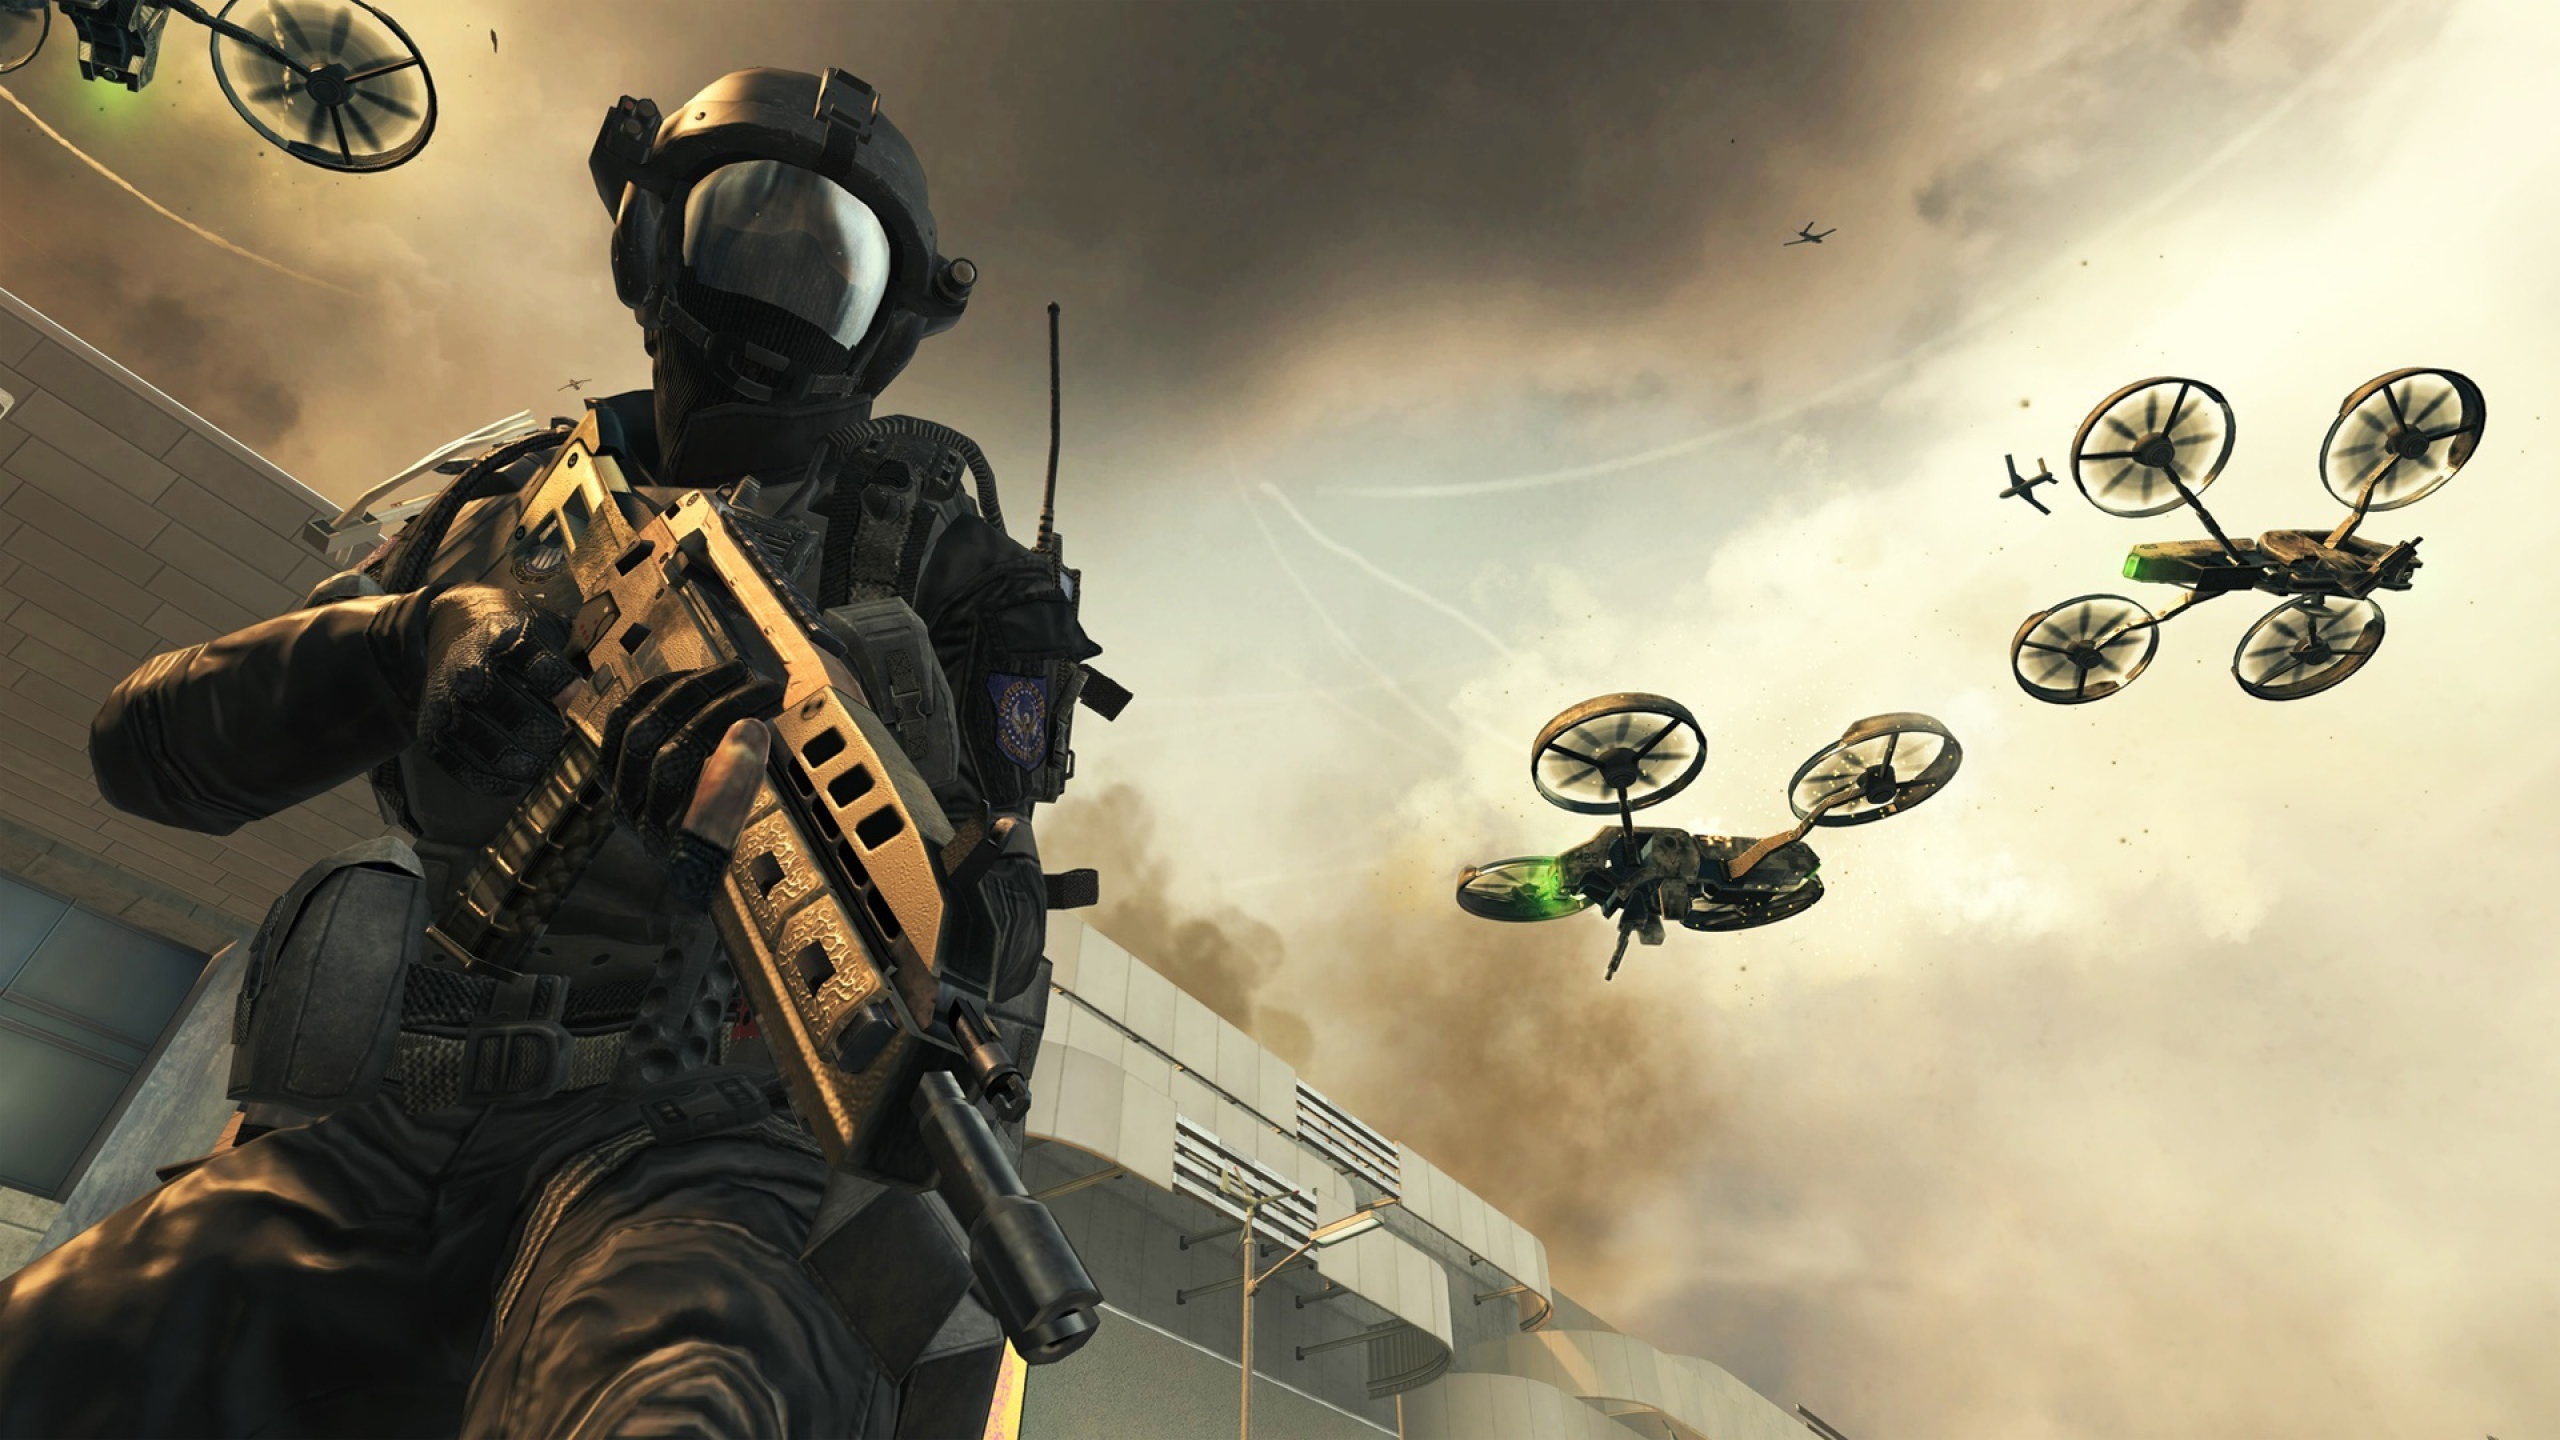 Download Wallpaper 2560x1440 Call of duty, Black ops 2, Game